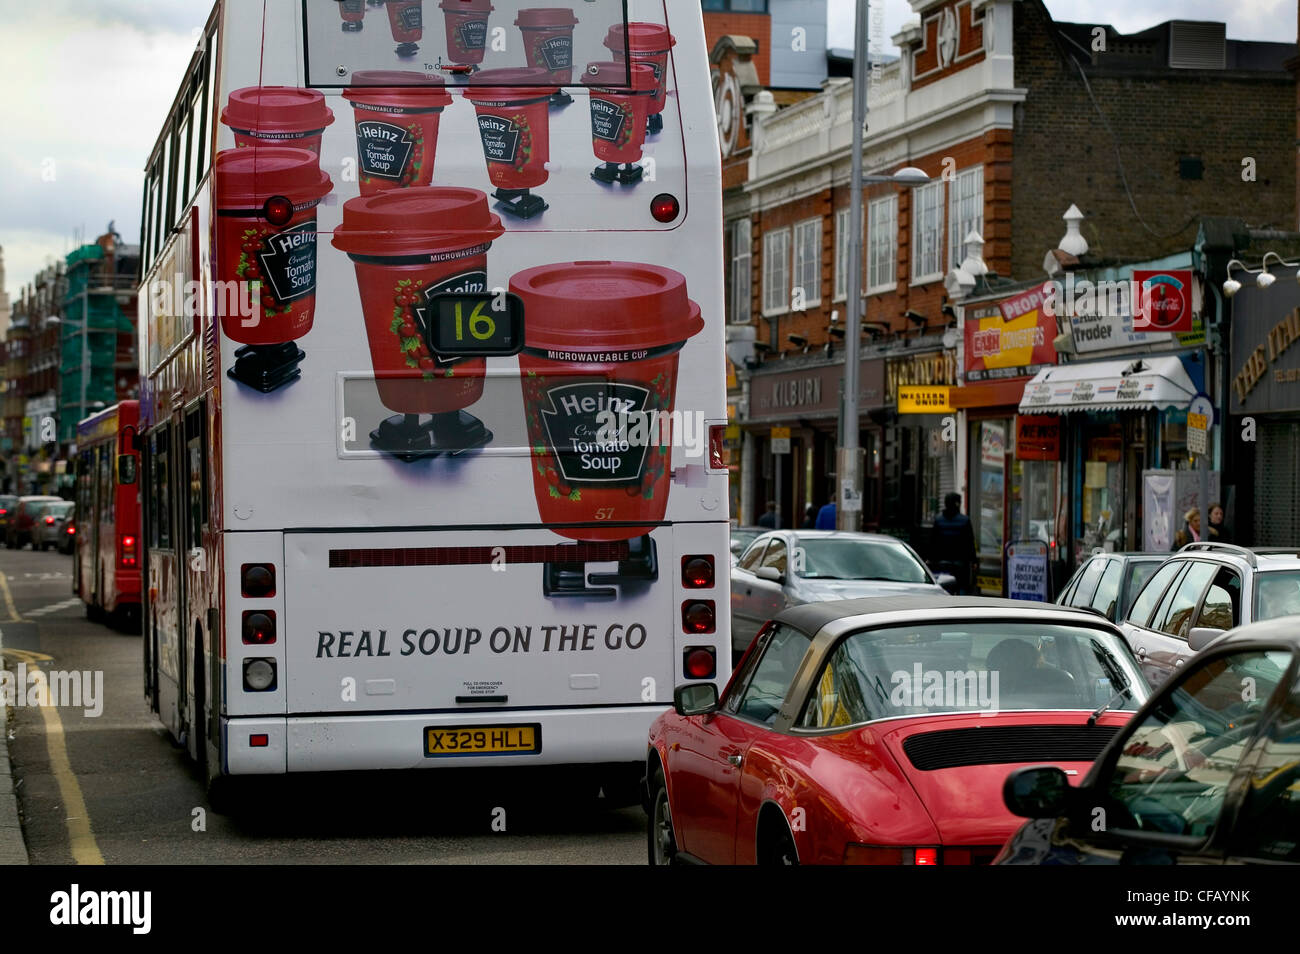 Kilburn, London. Bus decorated with advert for Heinz Tomato Soup. Stock Photo